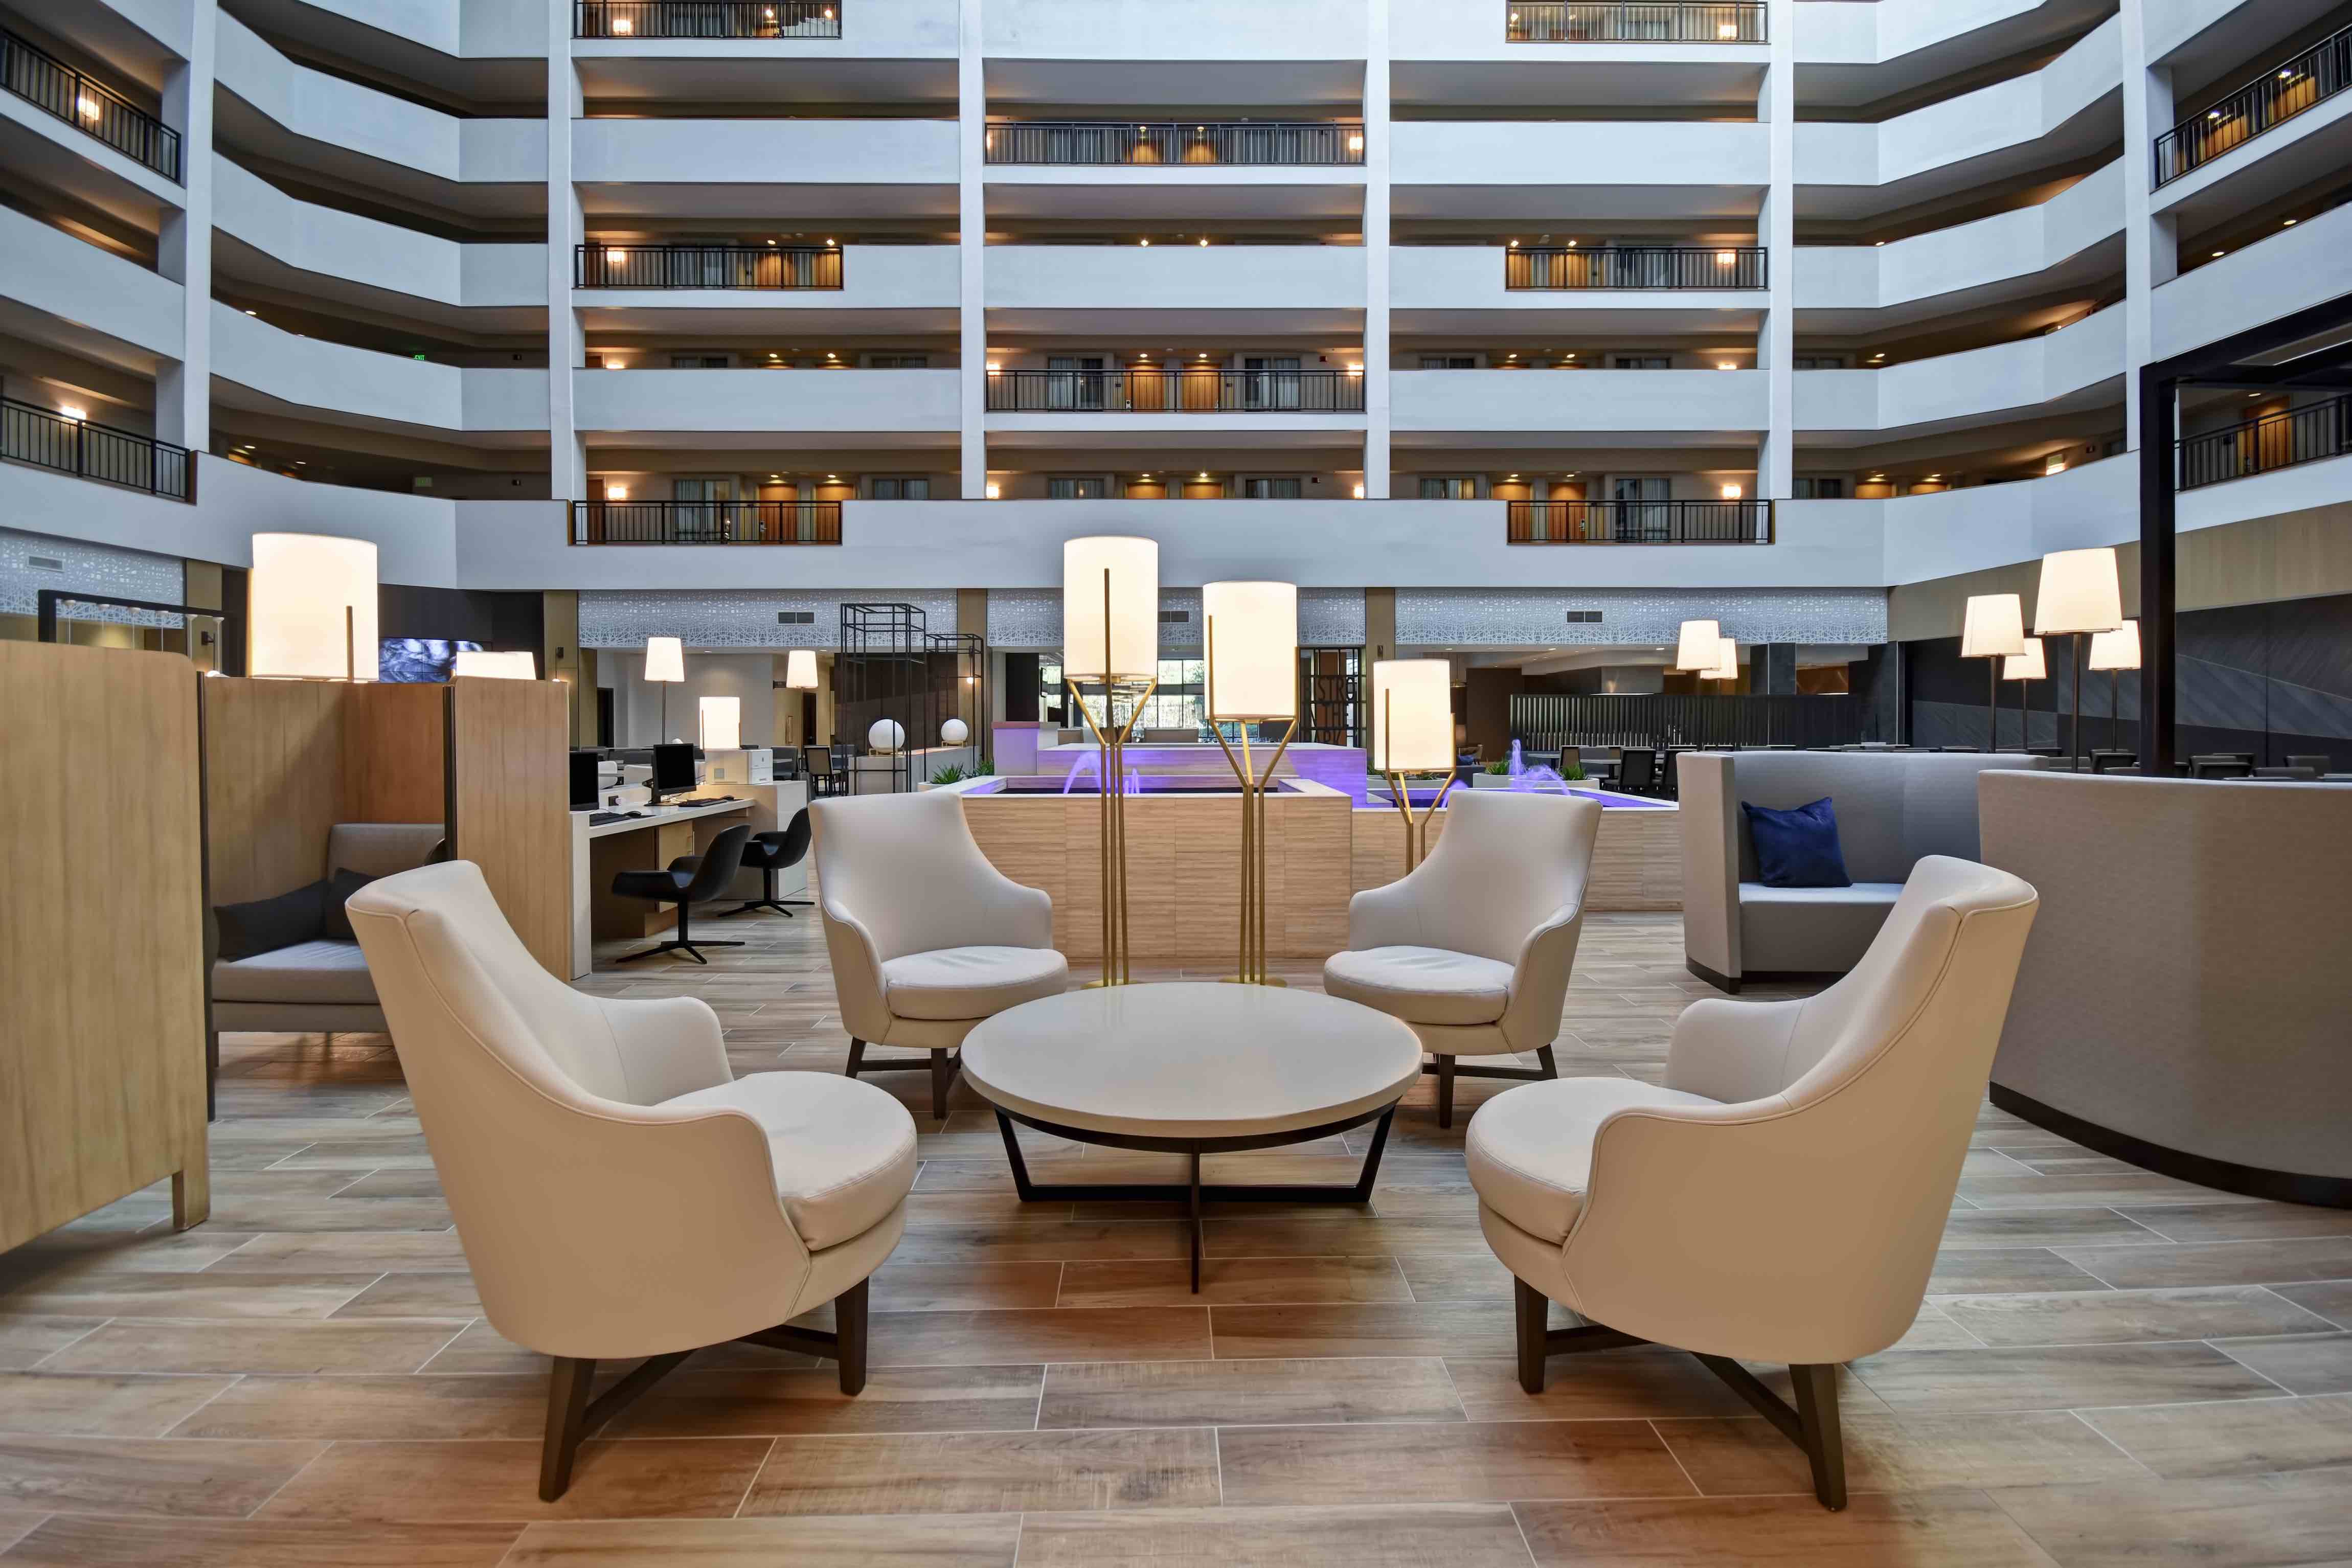 Embassy Suites Hilton Cary Renovation Transformation Complete